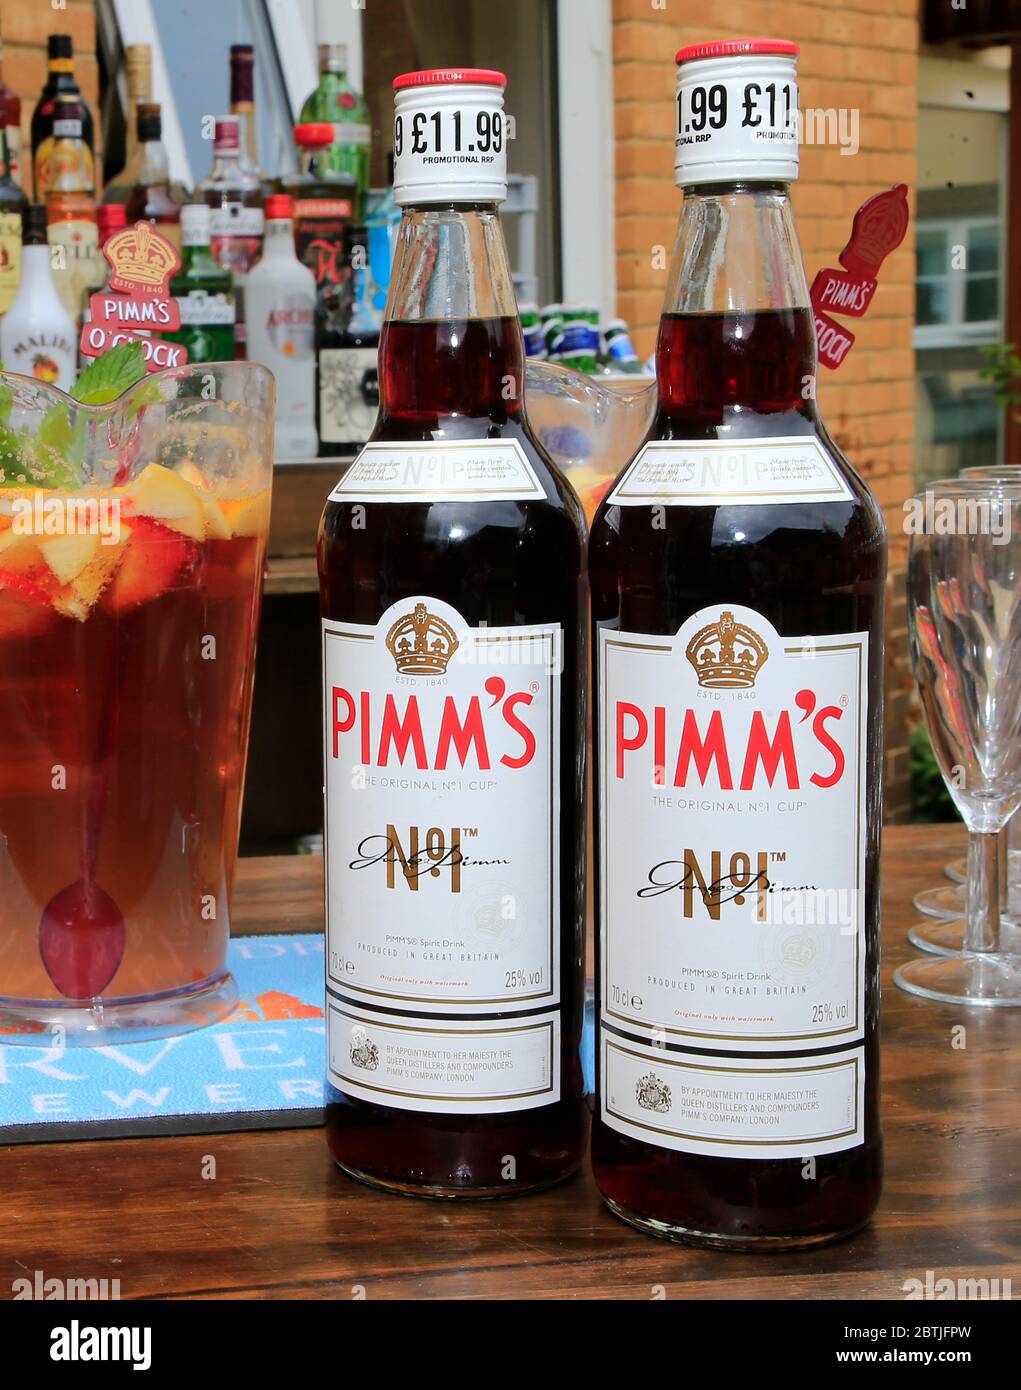 Bottles of Pimms on a bar. Stock Photo